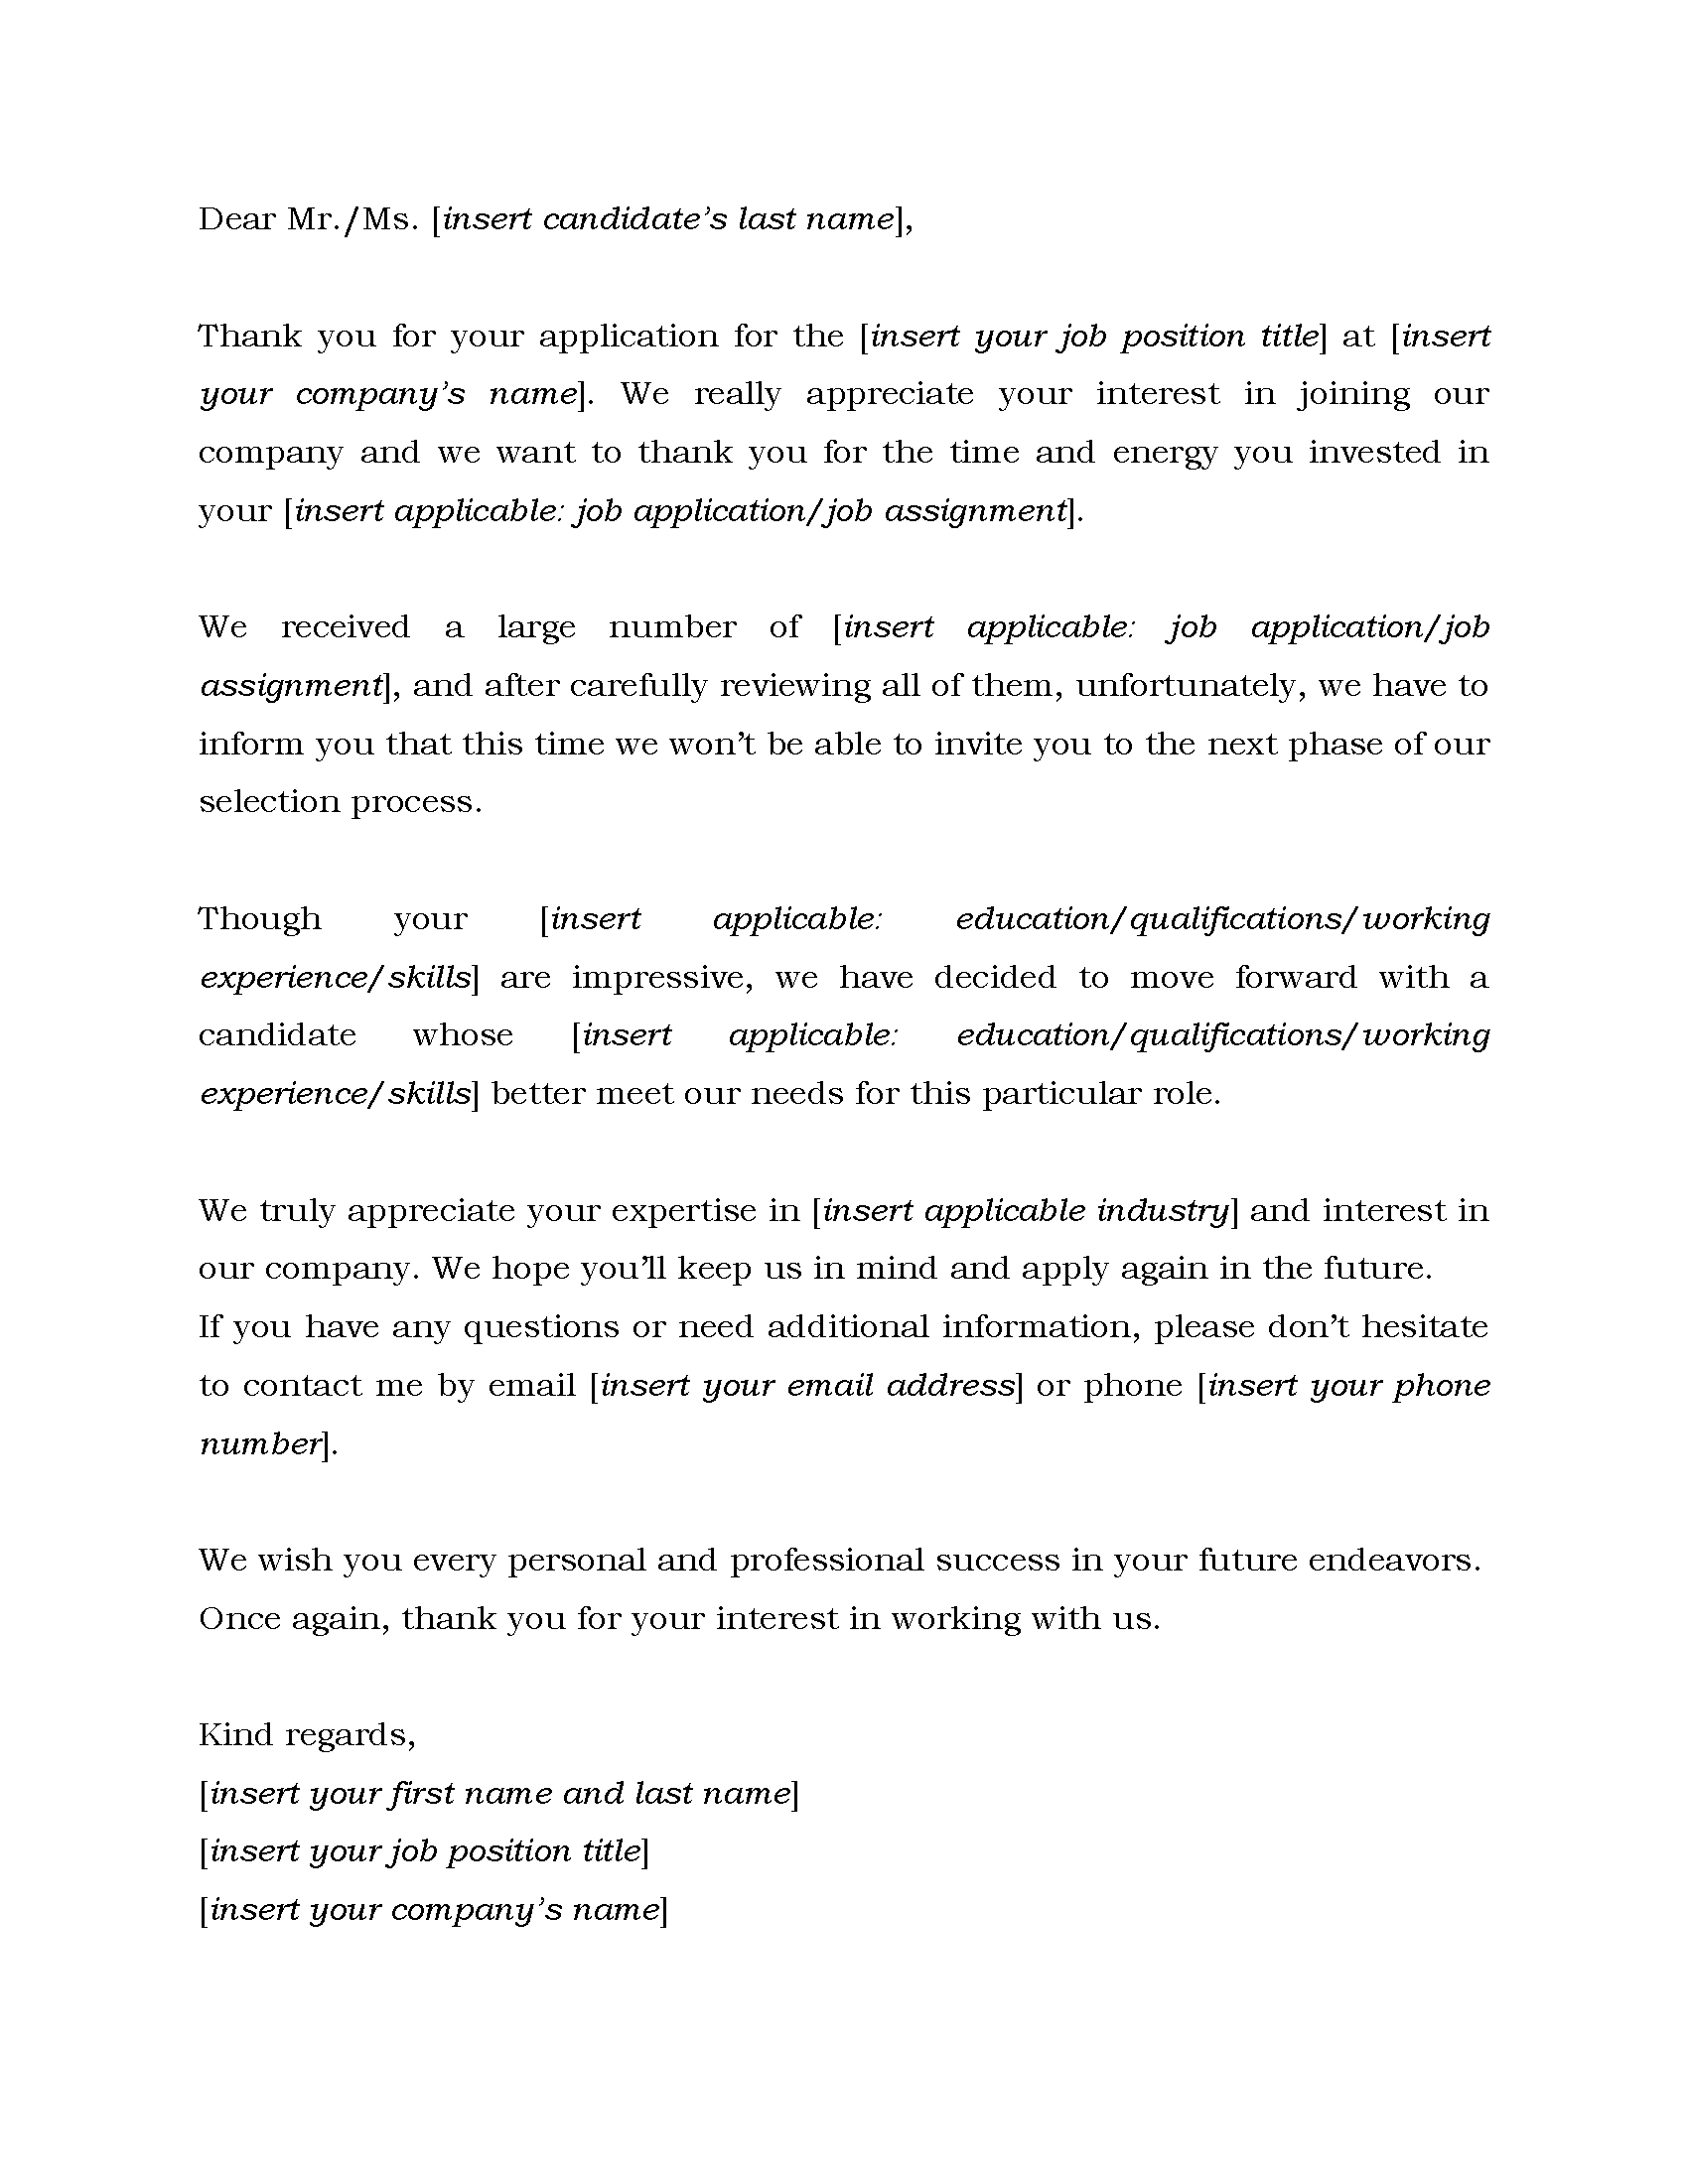 02- Candidate_Rejection_Email_Template